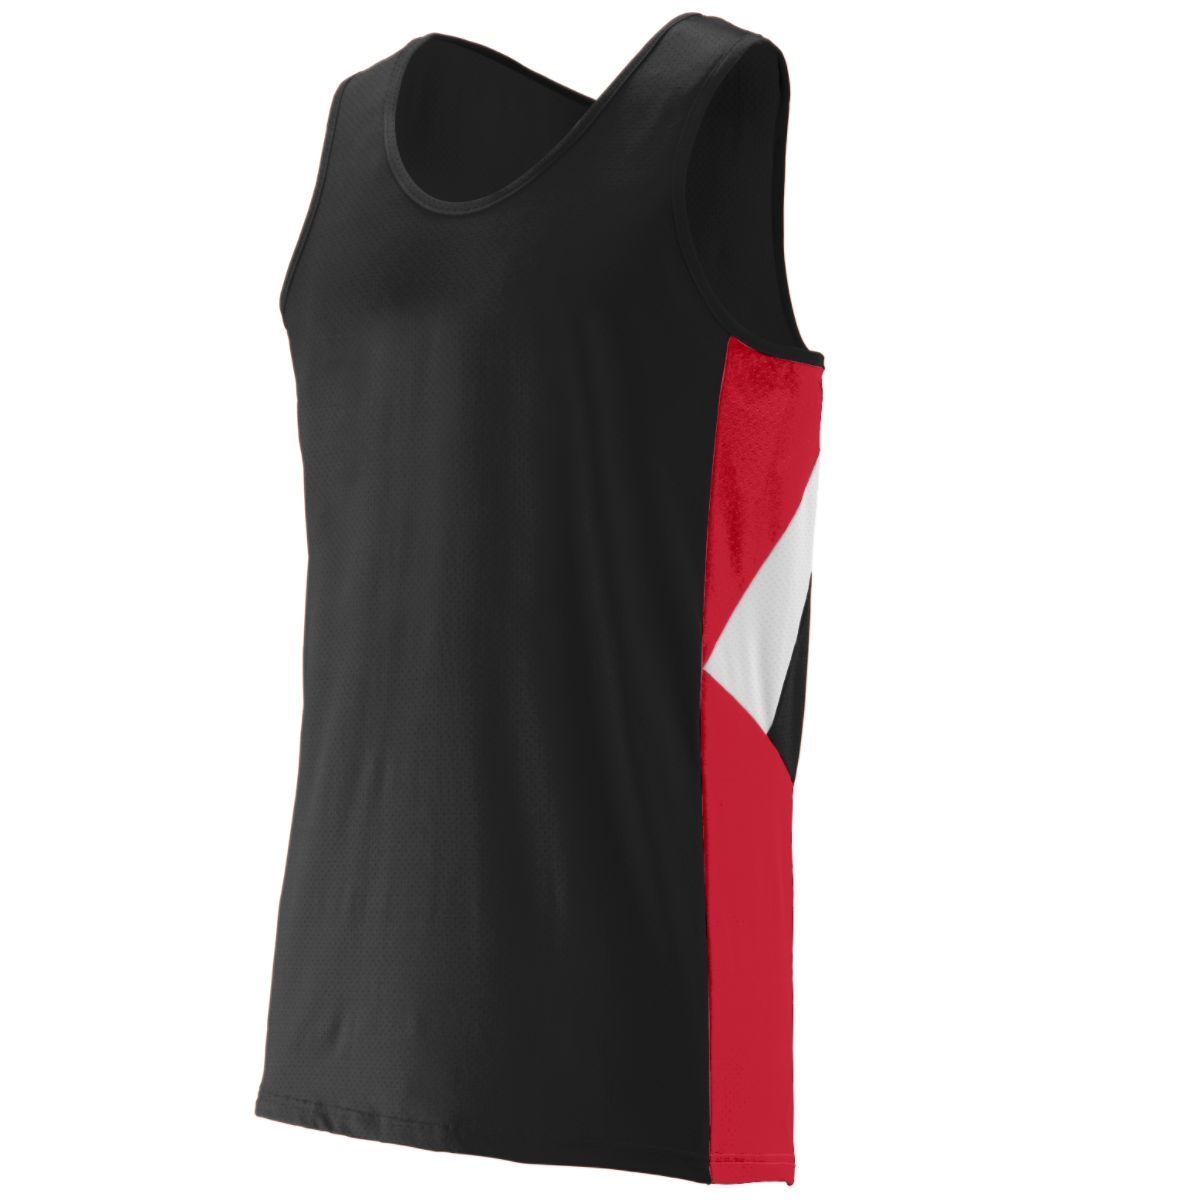 Augusta Sportswear Sprint Jersey in Black/Red/White  -Part of the Adult, Adult-Jersey, Augusta-Products, Track-Field, Shirts product lines at KanaleyCreations.com